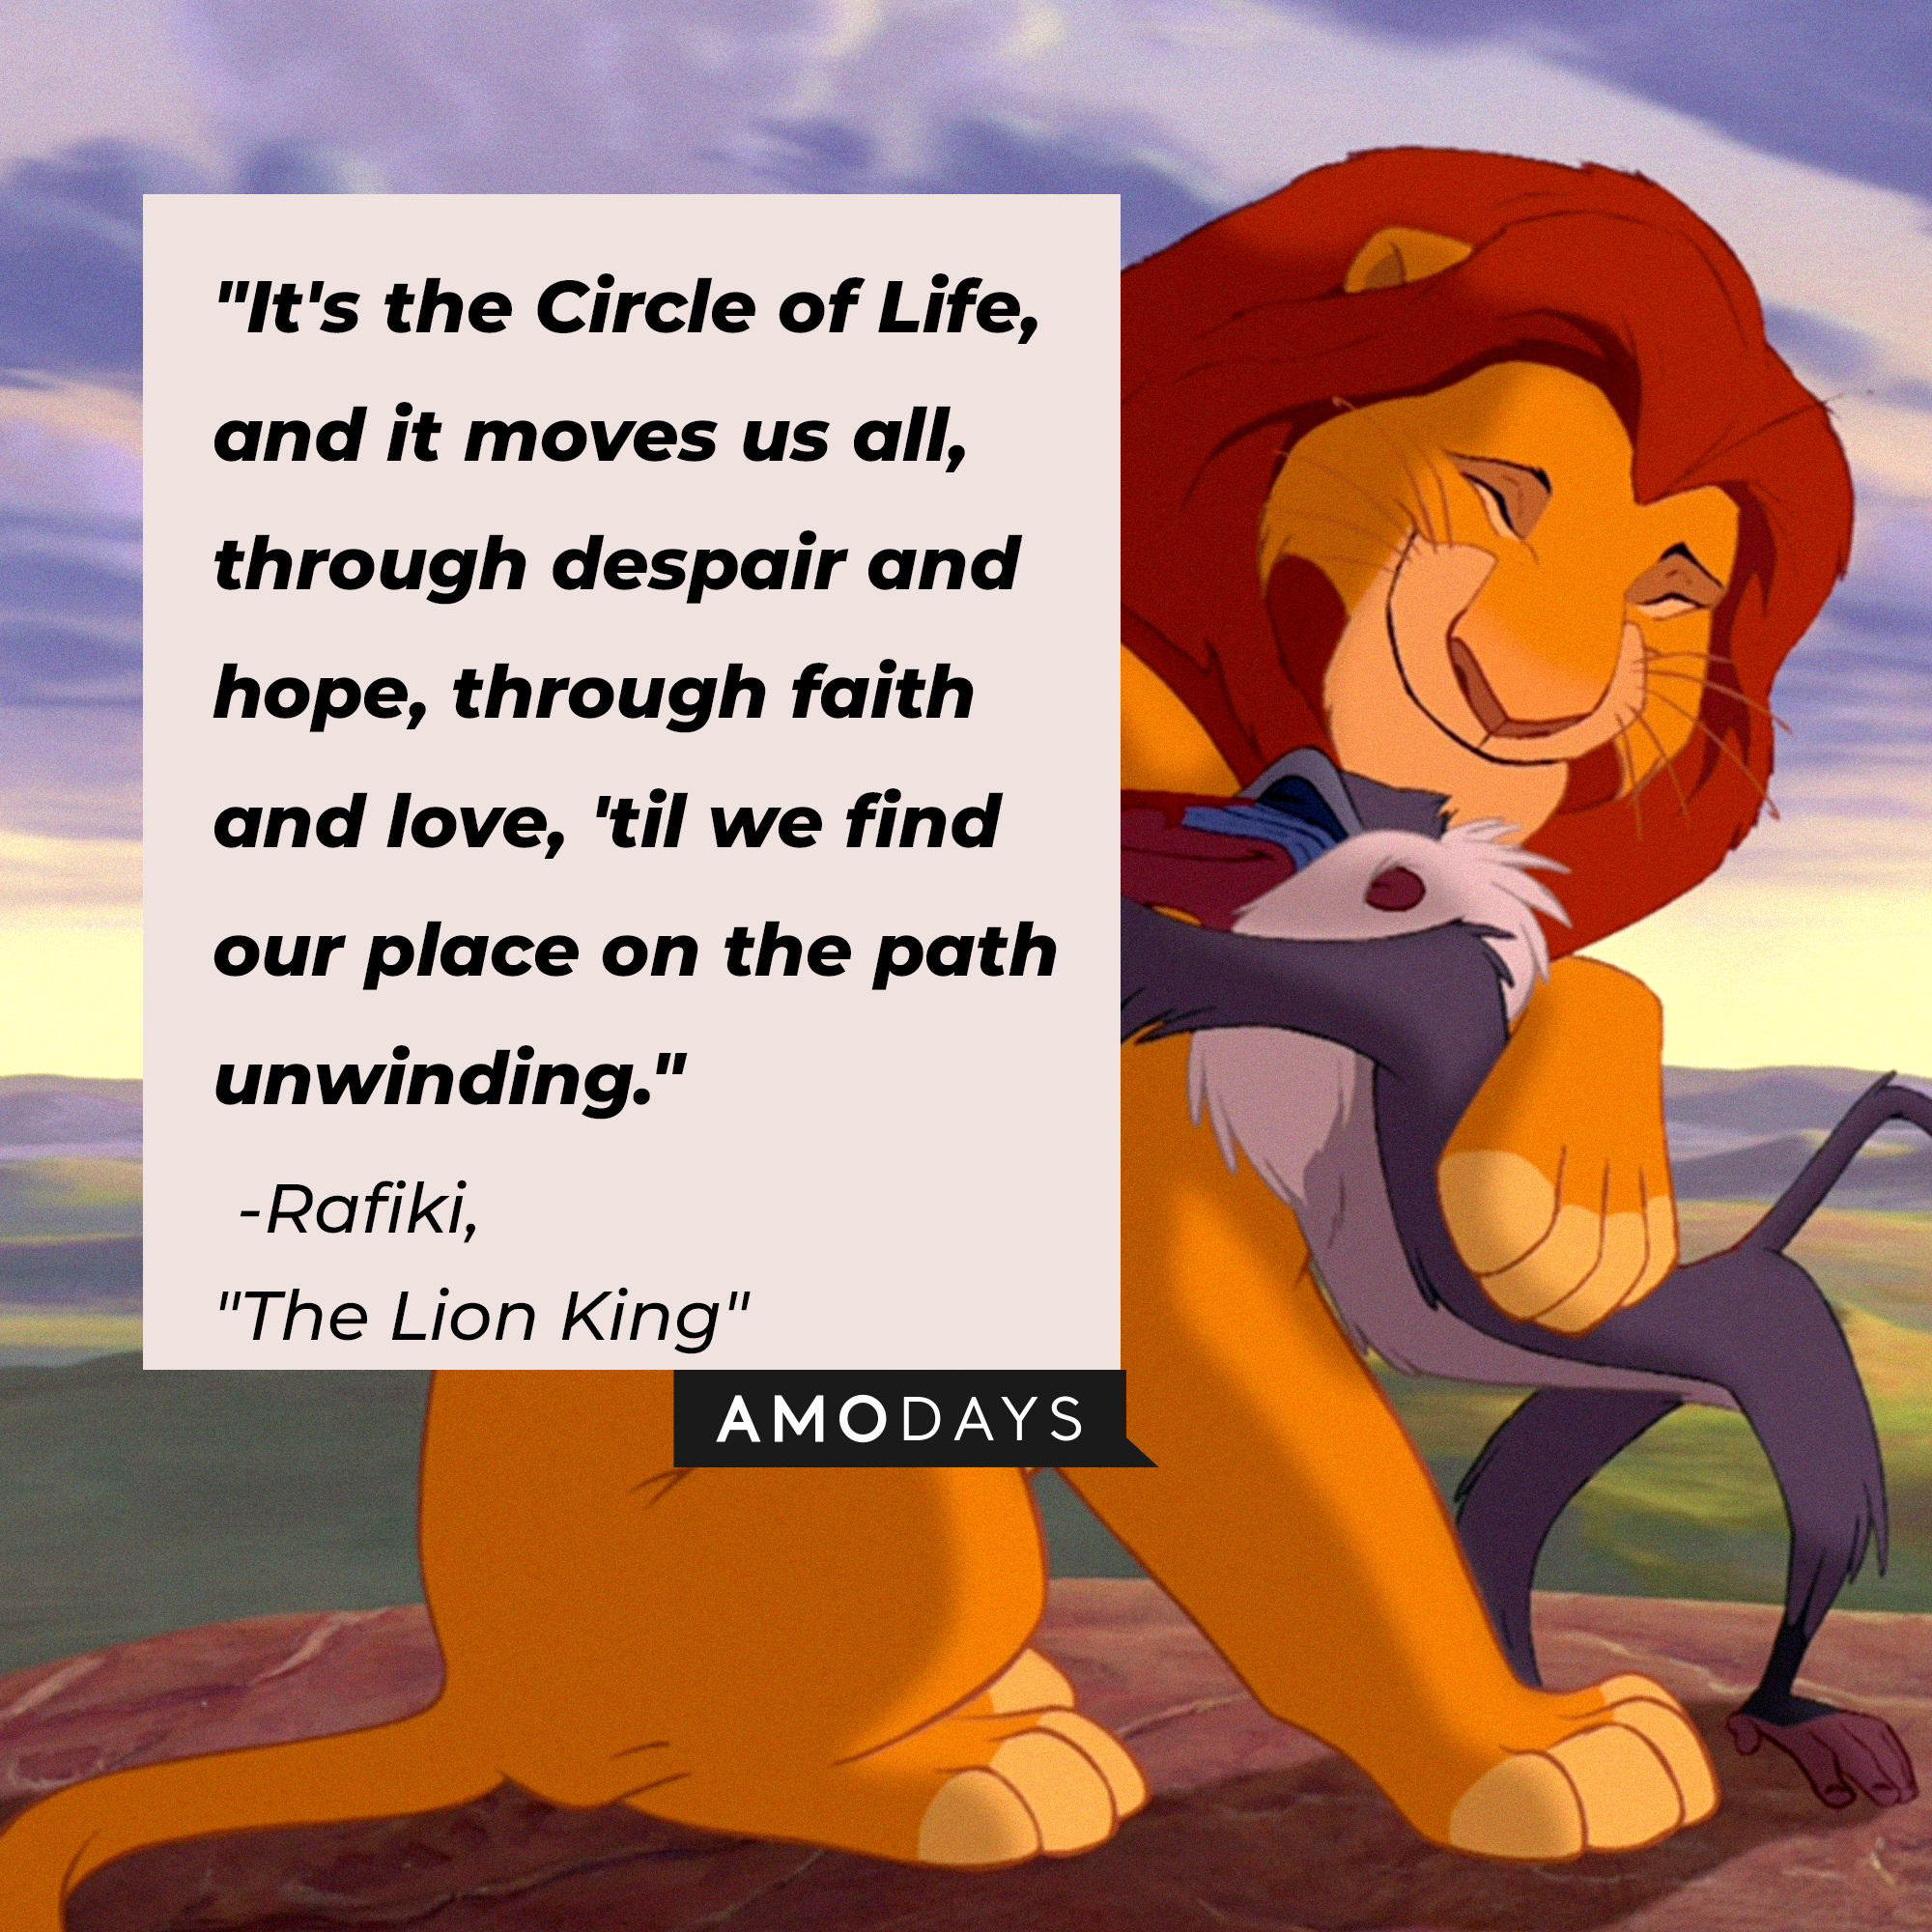 Rafiki with his quote: "It's the Circle of Life, and it moves us all, through despair and hope, through faith and love, 'til we find our place on the path unwinding."  | Source: Facebook.com/DisneyTheLionKing